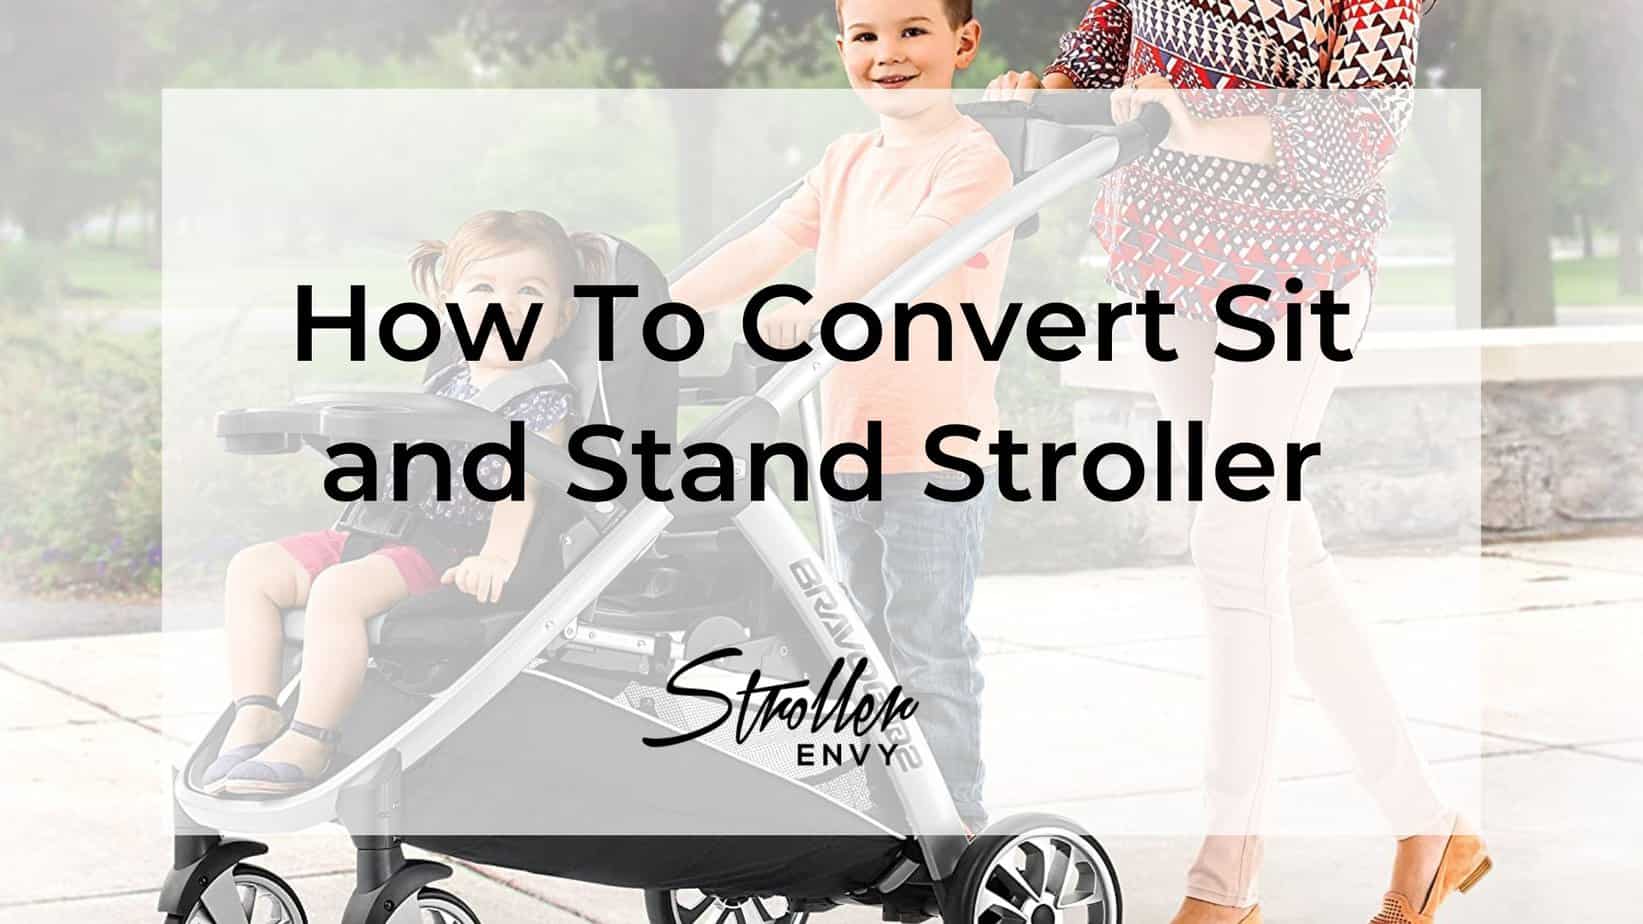 How To Convert Sit and Stand Stroller